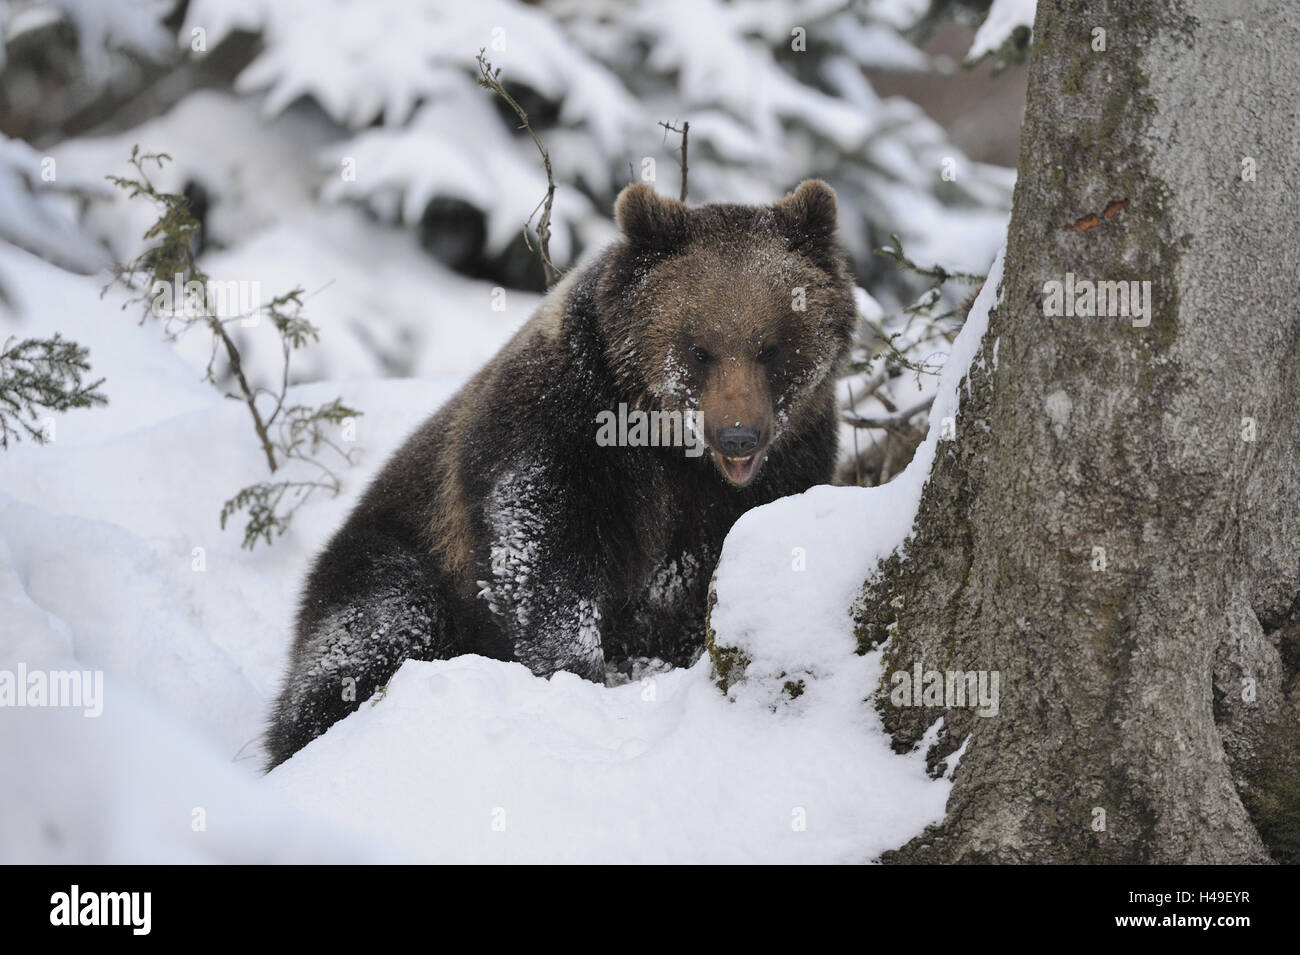 Brown bear, young animal, snow, sit, carefully, brown bear, winters, national park, snow, Jung's bear, great bear, bear, predator, land predator, doggy, snowy, Bavaria, Germany, mammal, wild animal, nature, animal, animal world, outside, whole body, behaviour, rest, are relaxing, take it easy, there sit, playfully, vertebrate, captivity, forest inhabitants, edge of the forest, trunk, curiosity, medium close-up, Stock Photo